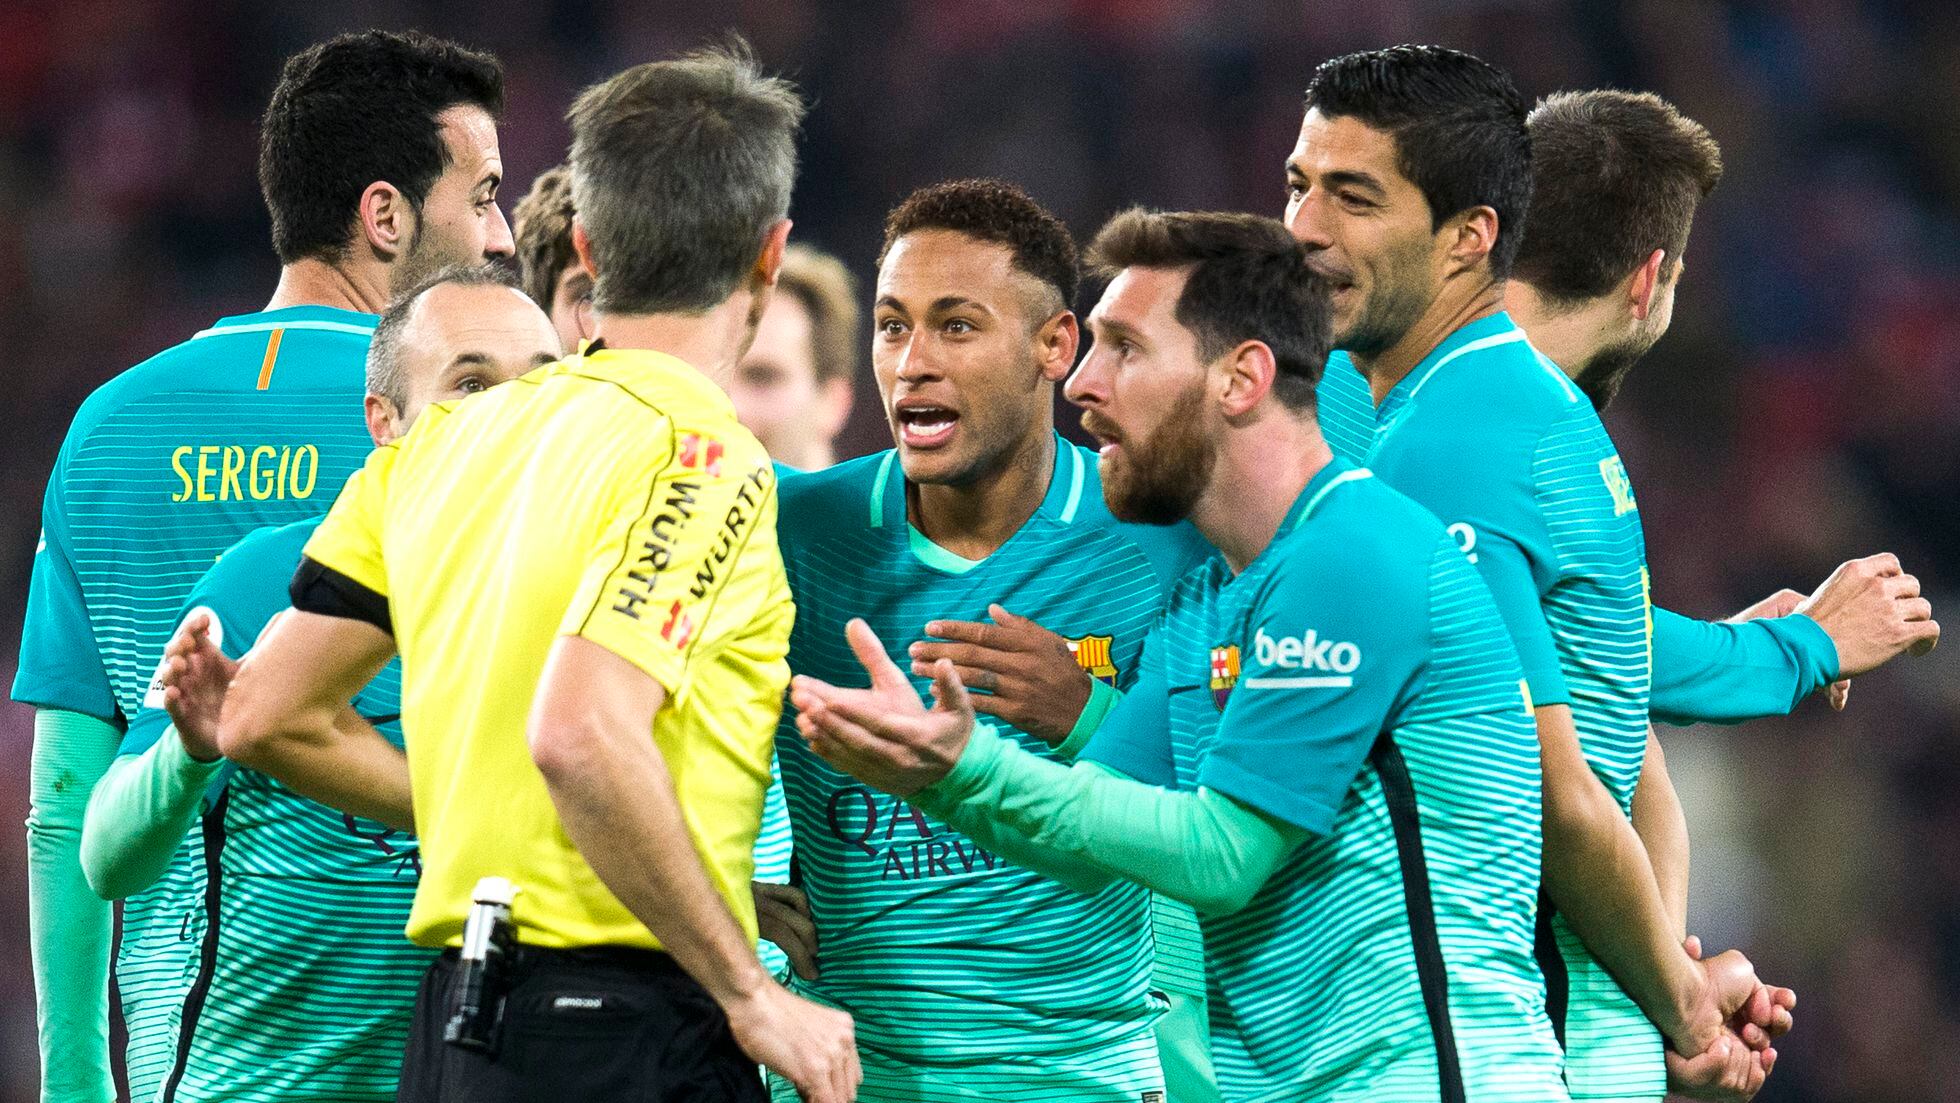 FC Barcelona paid €1.4 million over three years for alleged reports on  referees | Sports | EL PAÍS English Edition